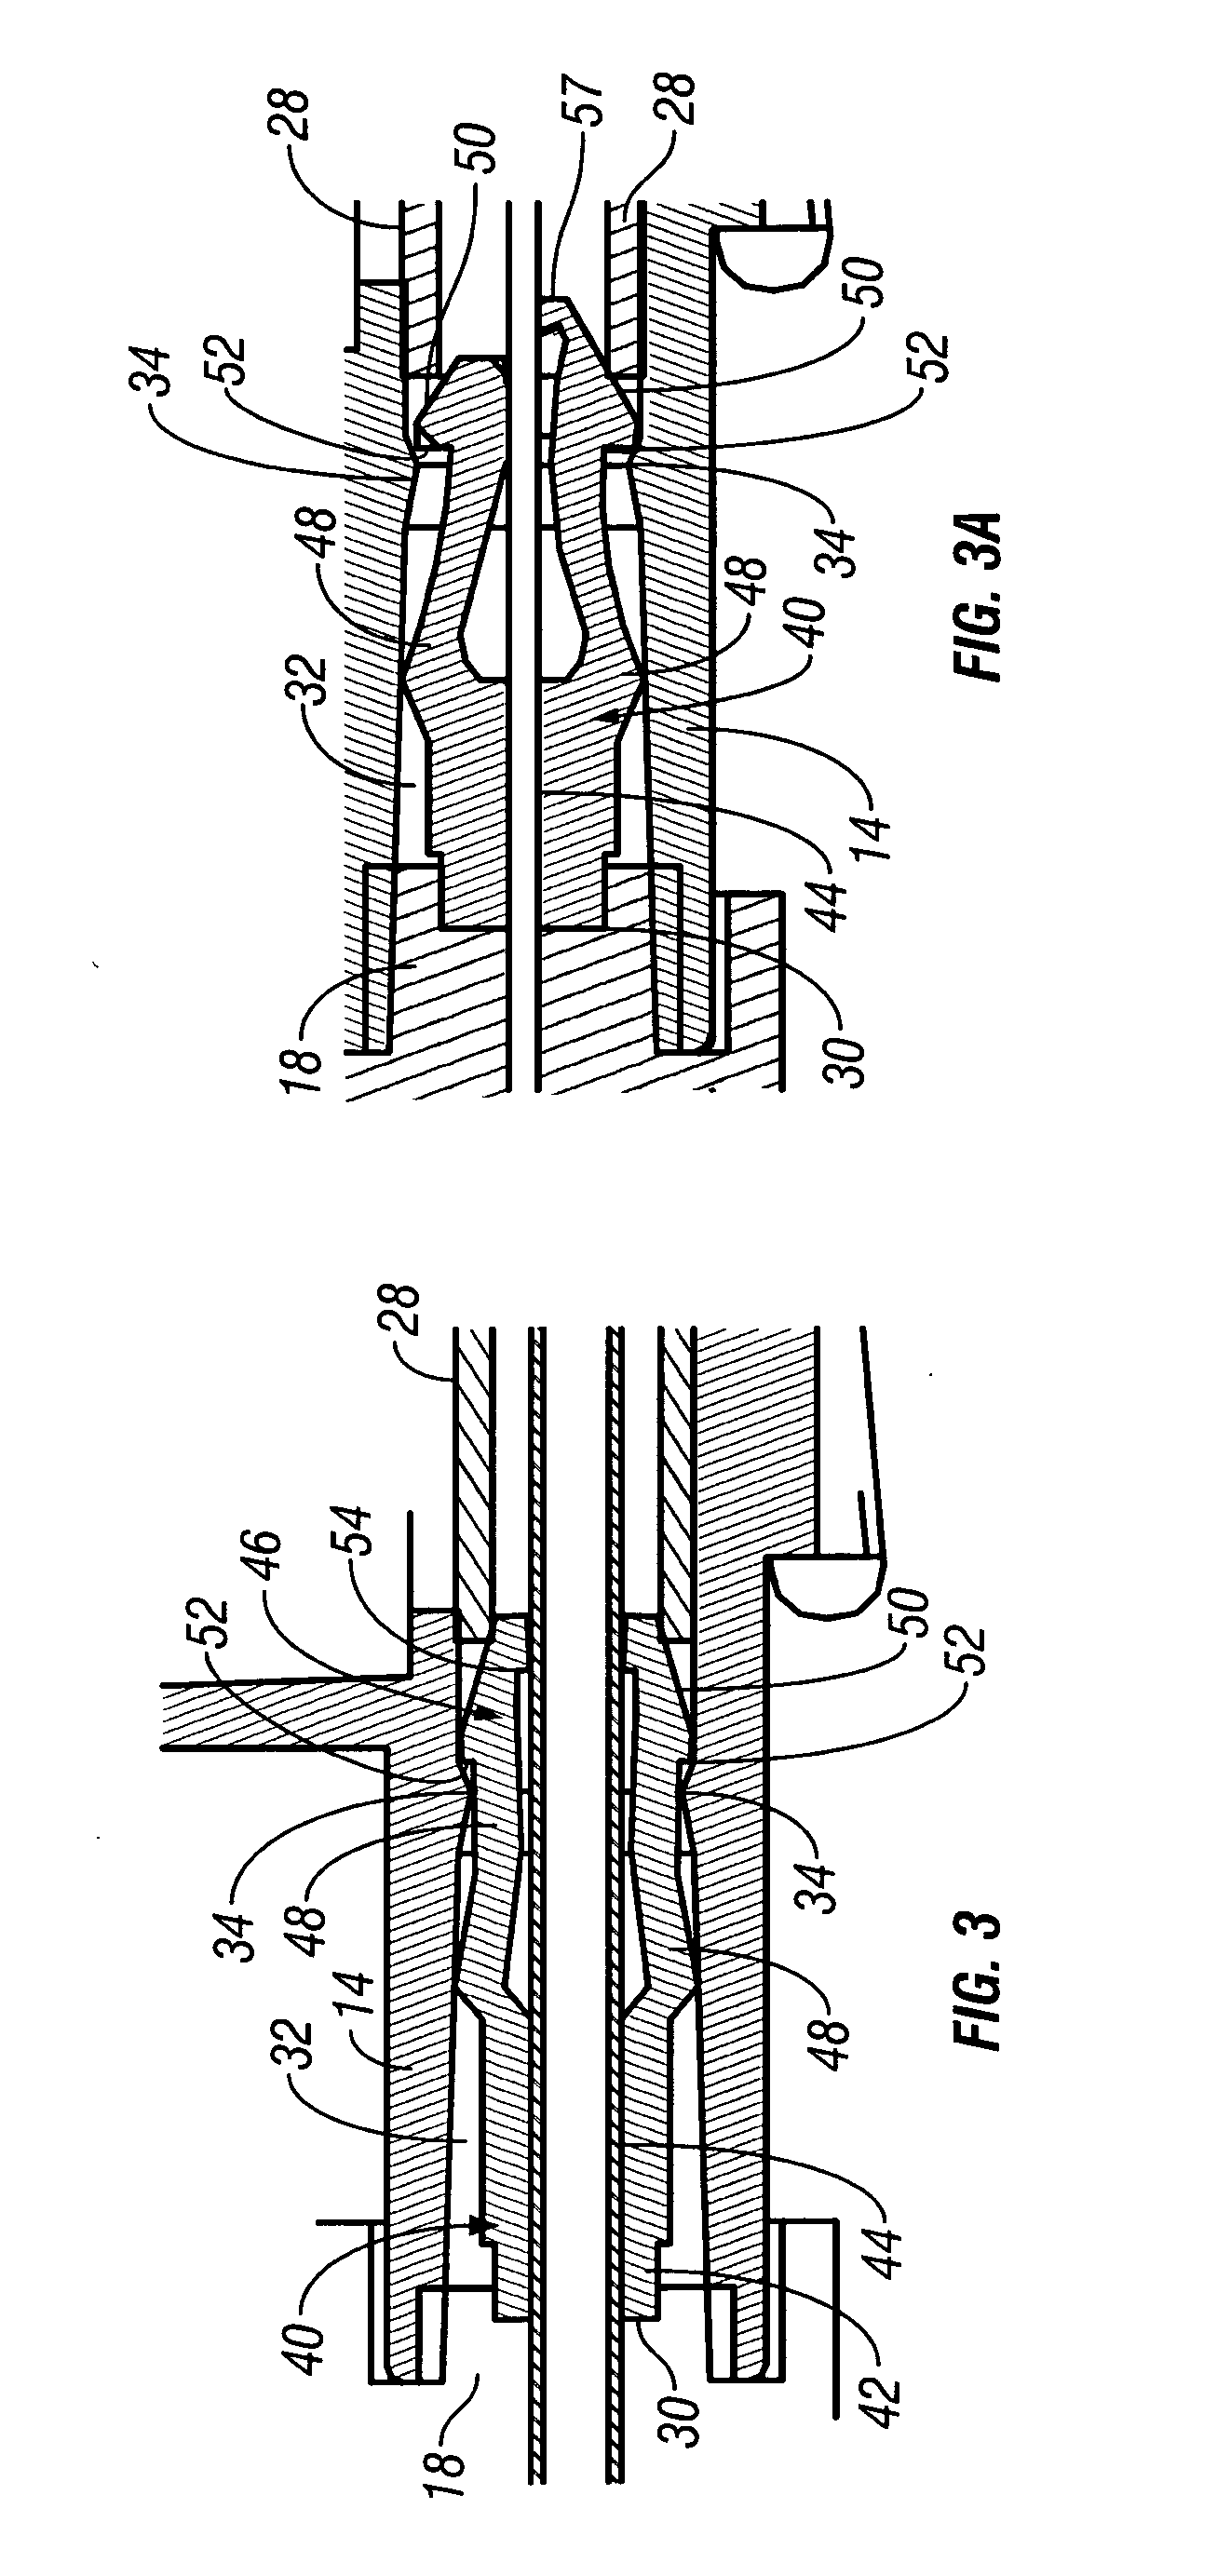 Needle safety device for an intravenous catheter apparatus and method of use